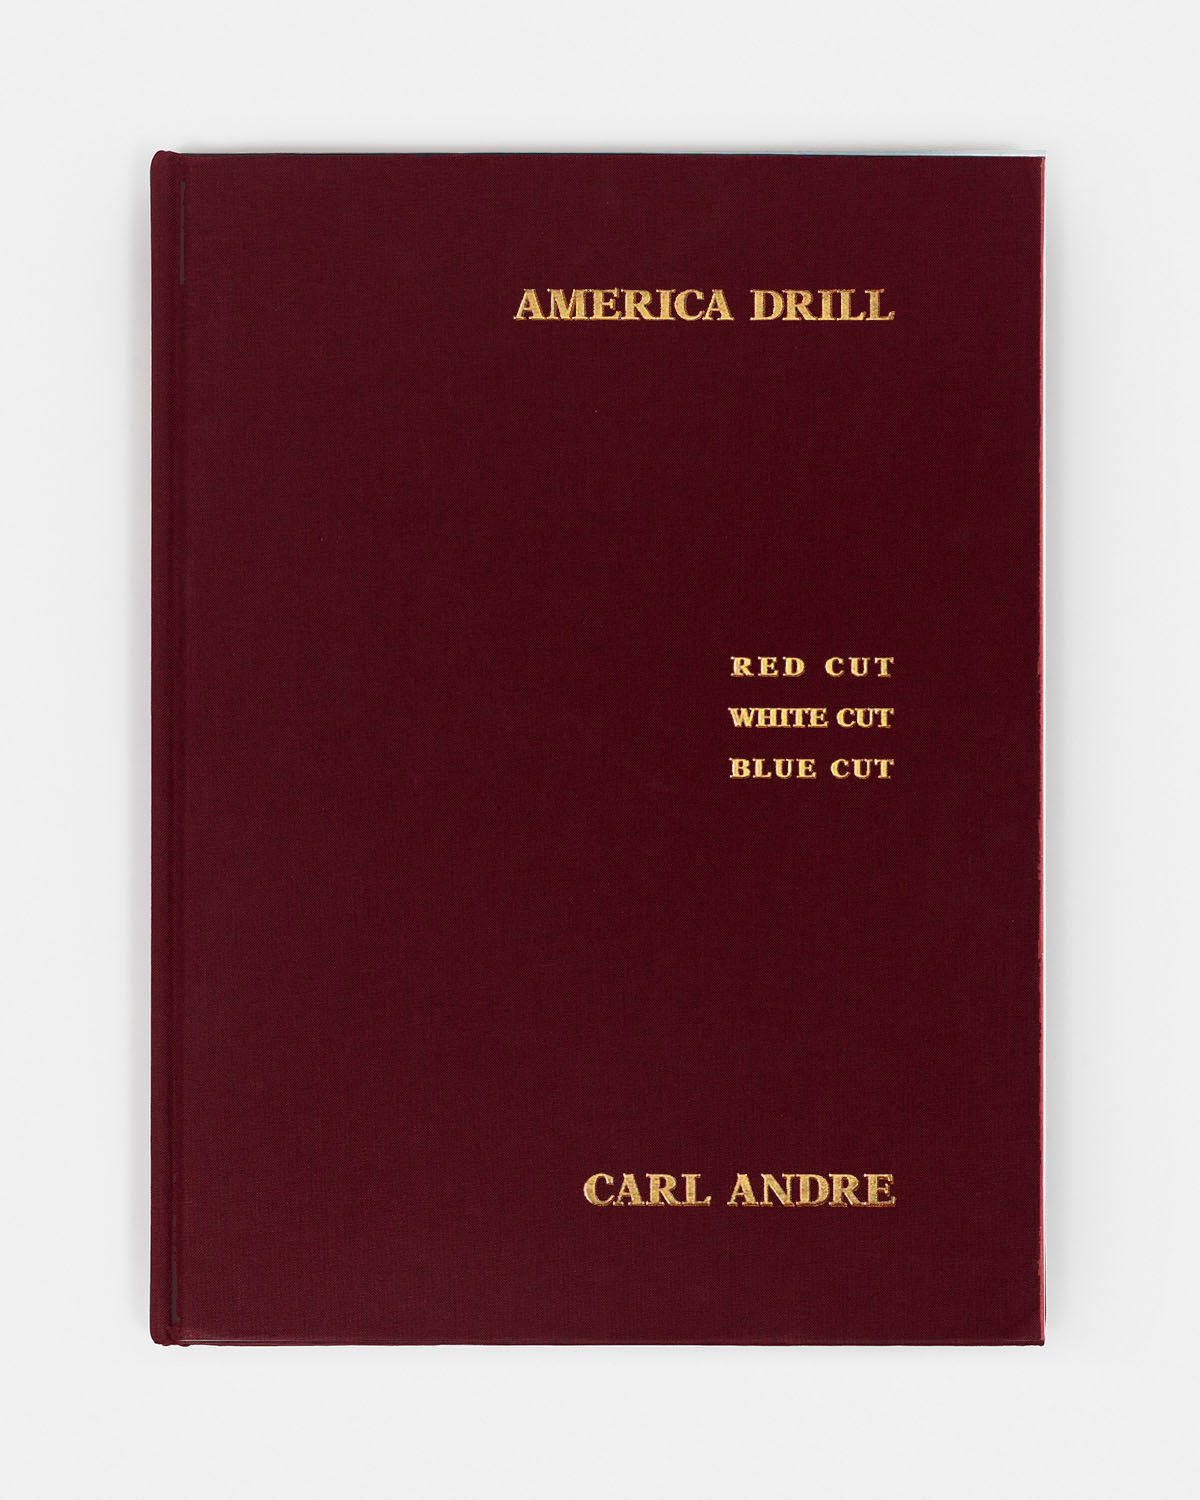 America Drill (signed), 1963/2003 - Vue suppl&eacute;mentaire